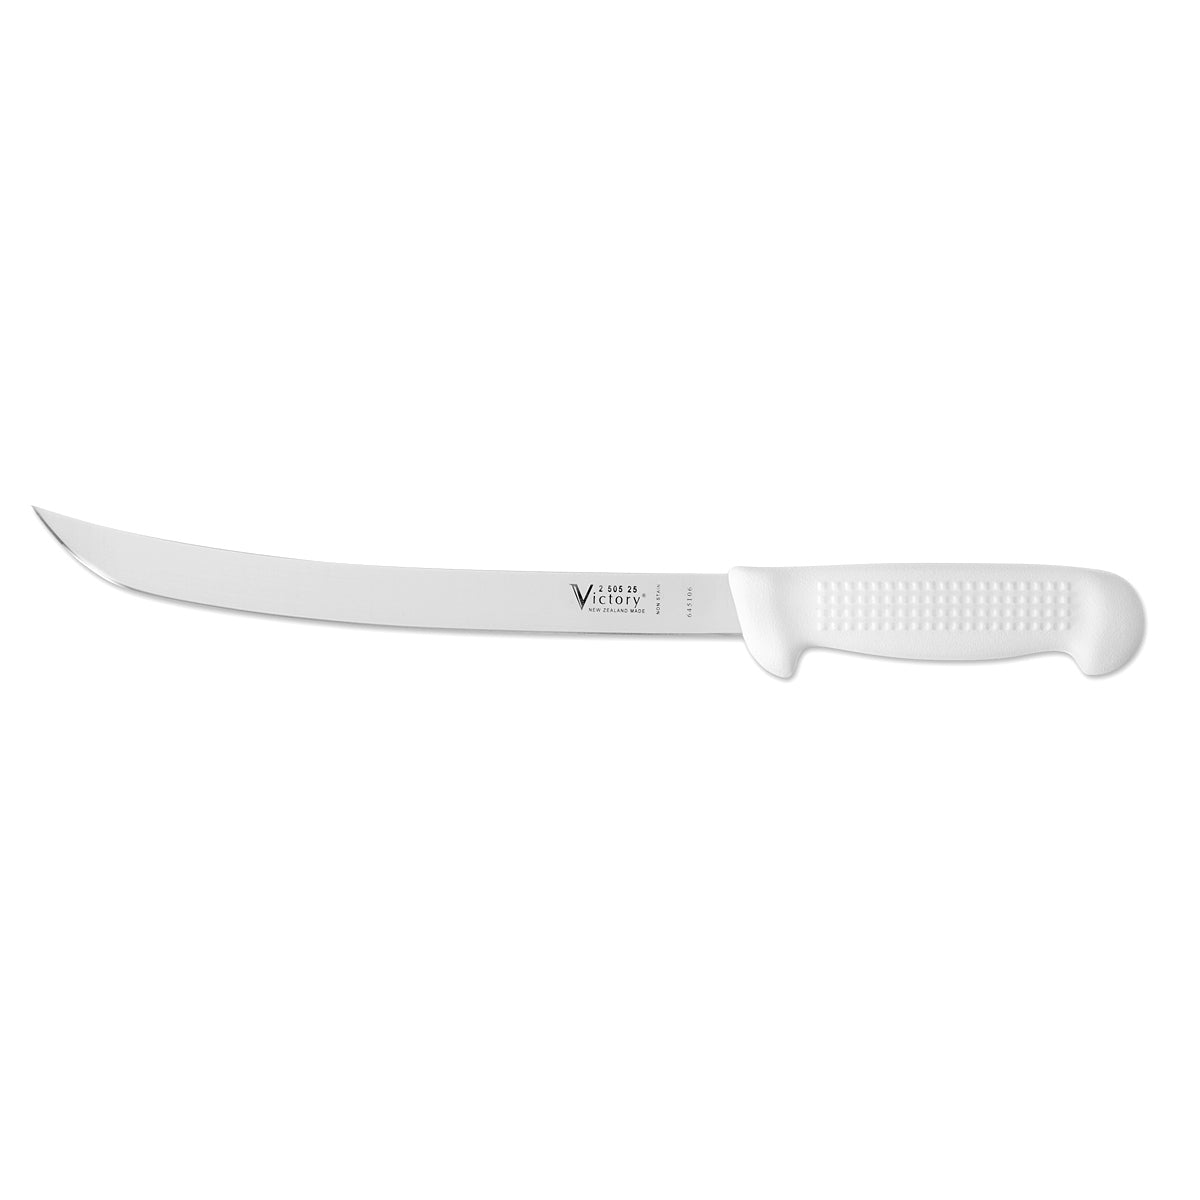 Victory 250525115 - 2.5mm x 25cm Stainless Steel Curved Filleting Knife White Plastic Handle